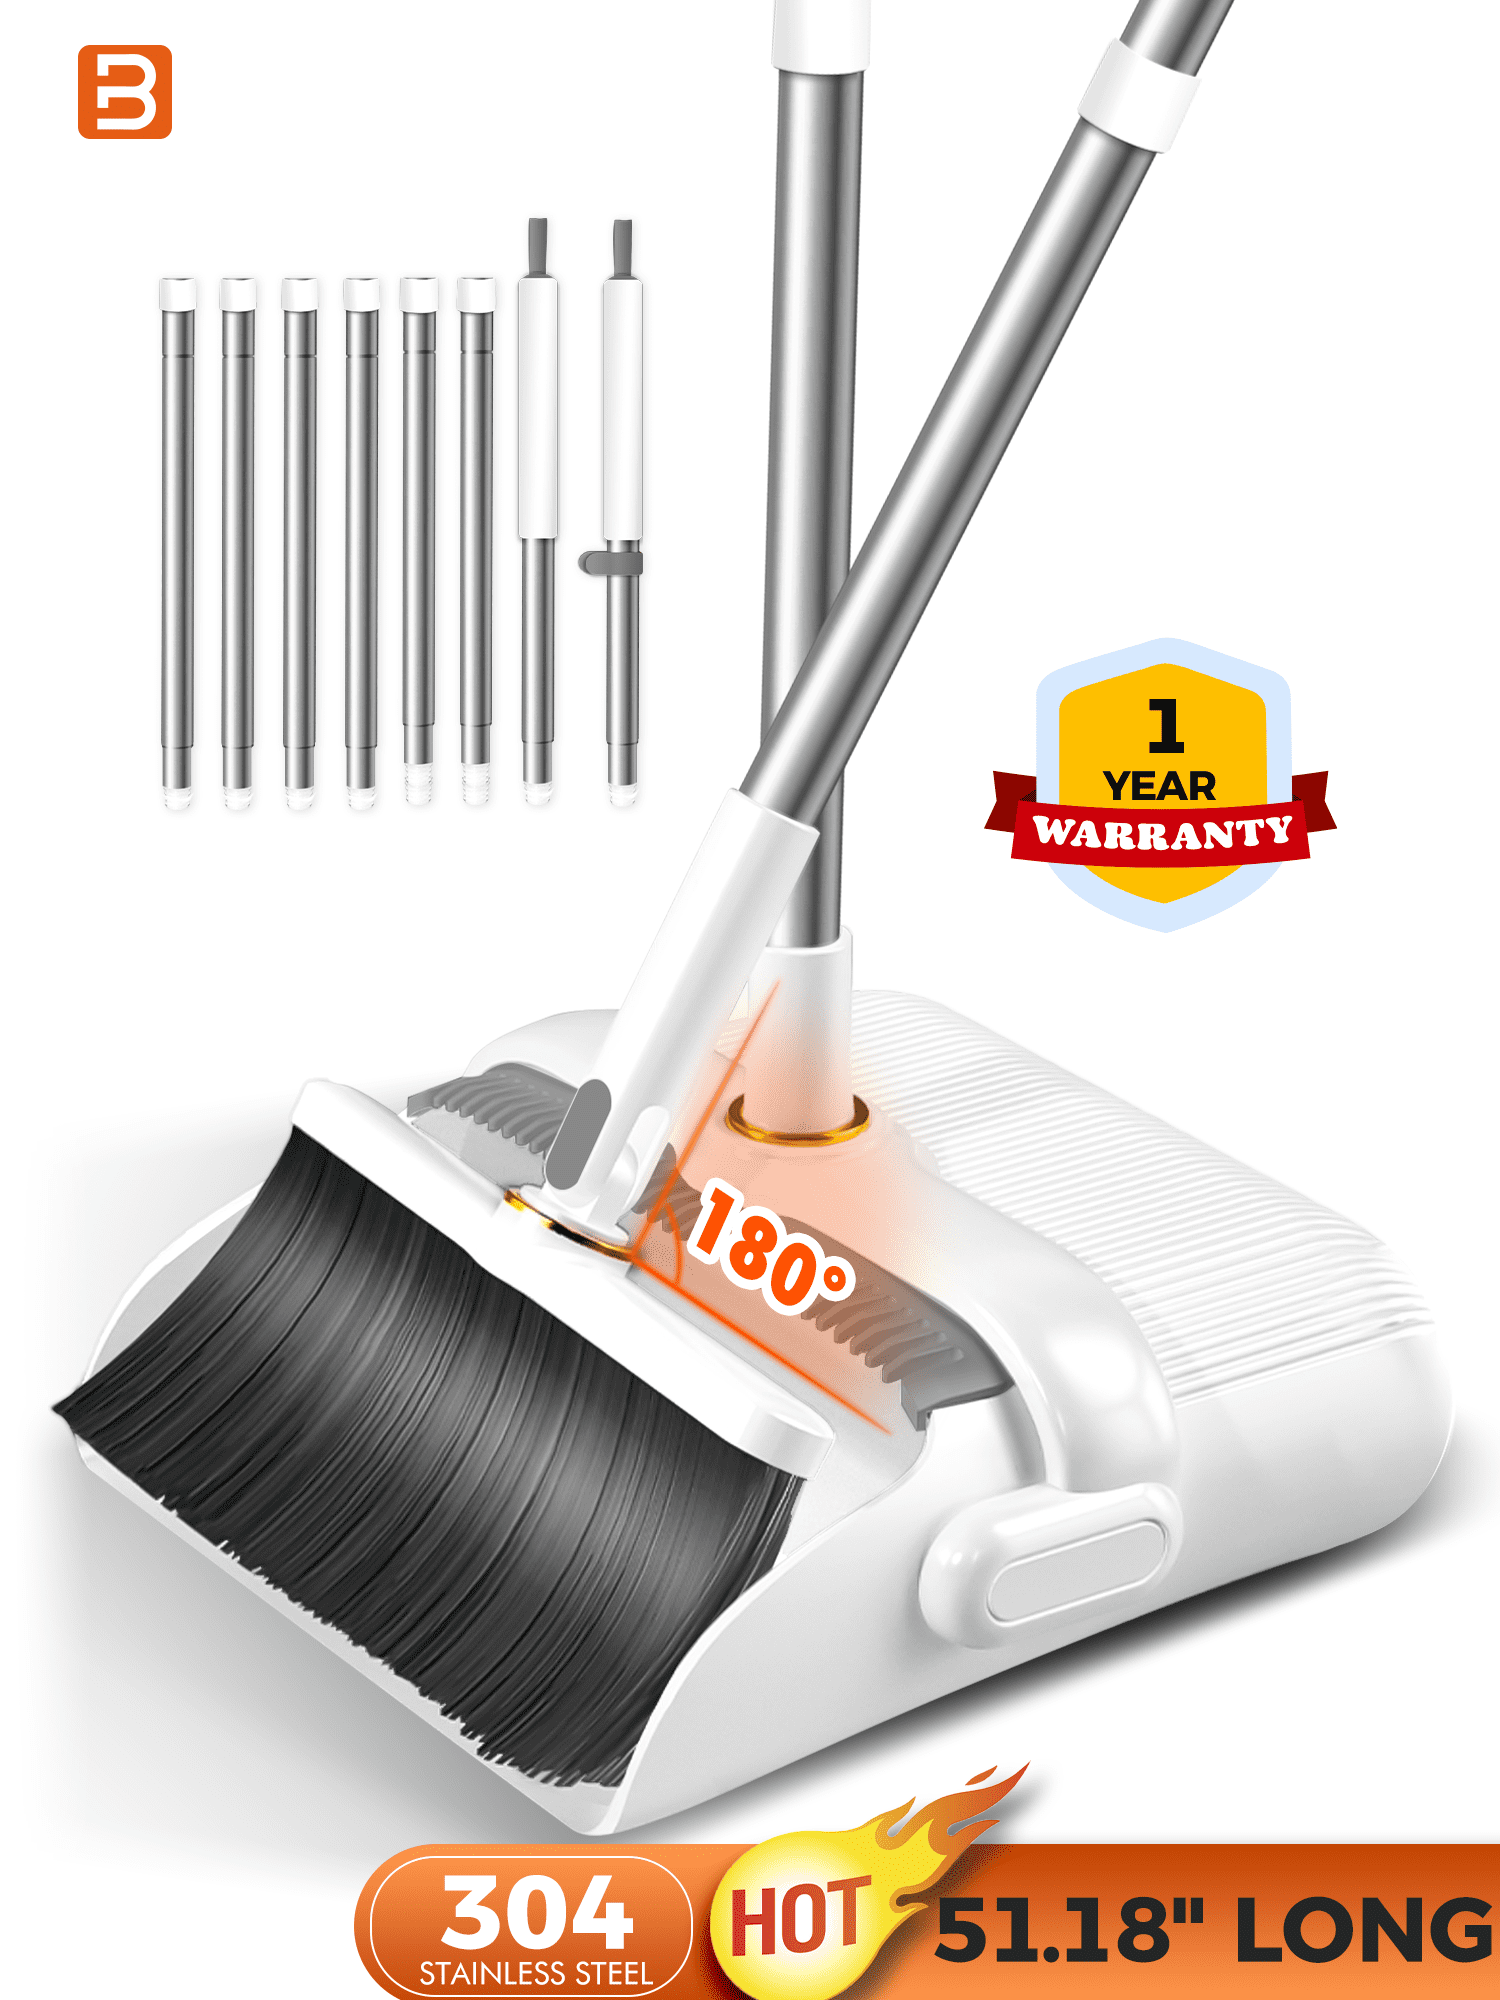 CQT Broom And Dustpan And Brush Mop Set With Handle Brush For Home Kitchen  Cleaner Floor Sweeping Upright Stand Up Dust Pan C 230613 From Heng10,  $22.34